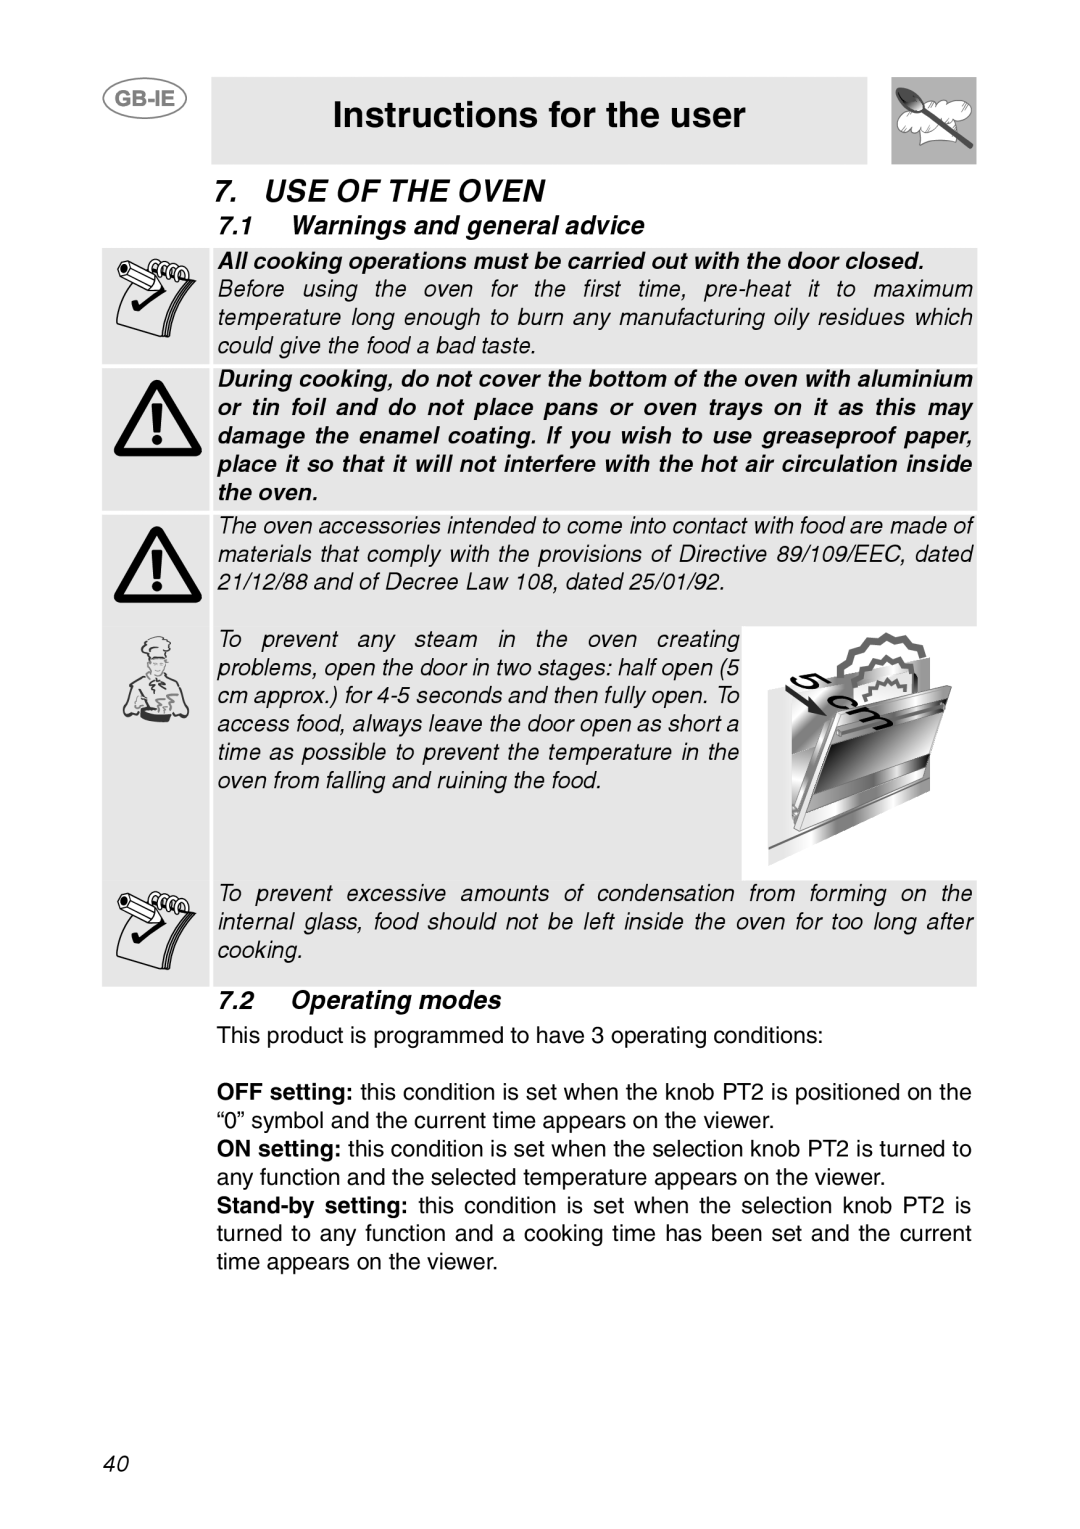 Smeg FP131B1 manual Use Of The Oven, Instructions for the user, Warnings and general advice, Operating modes 